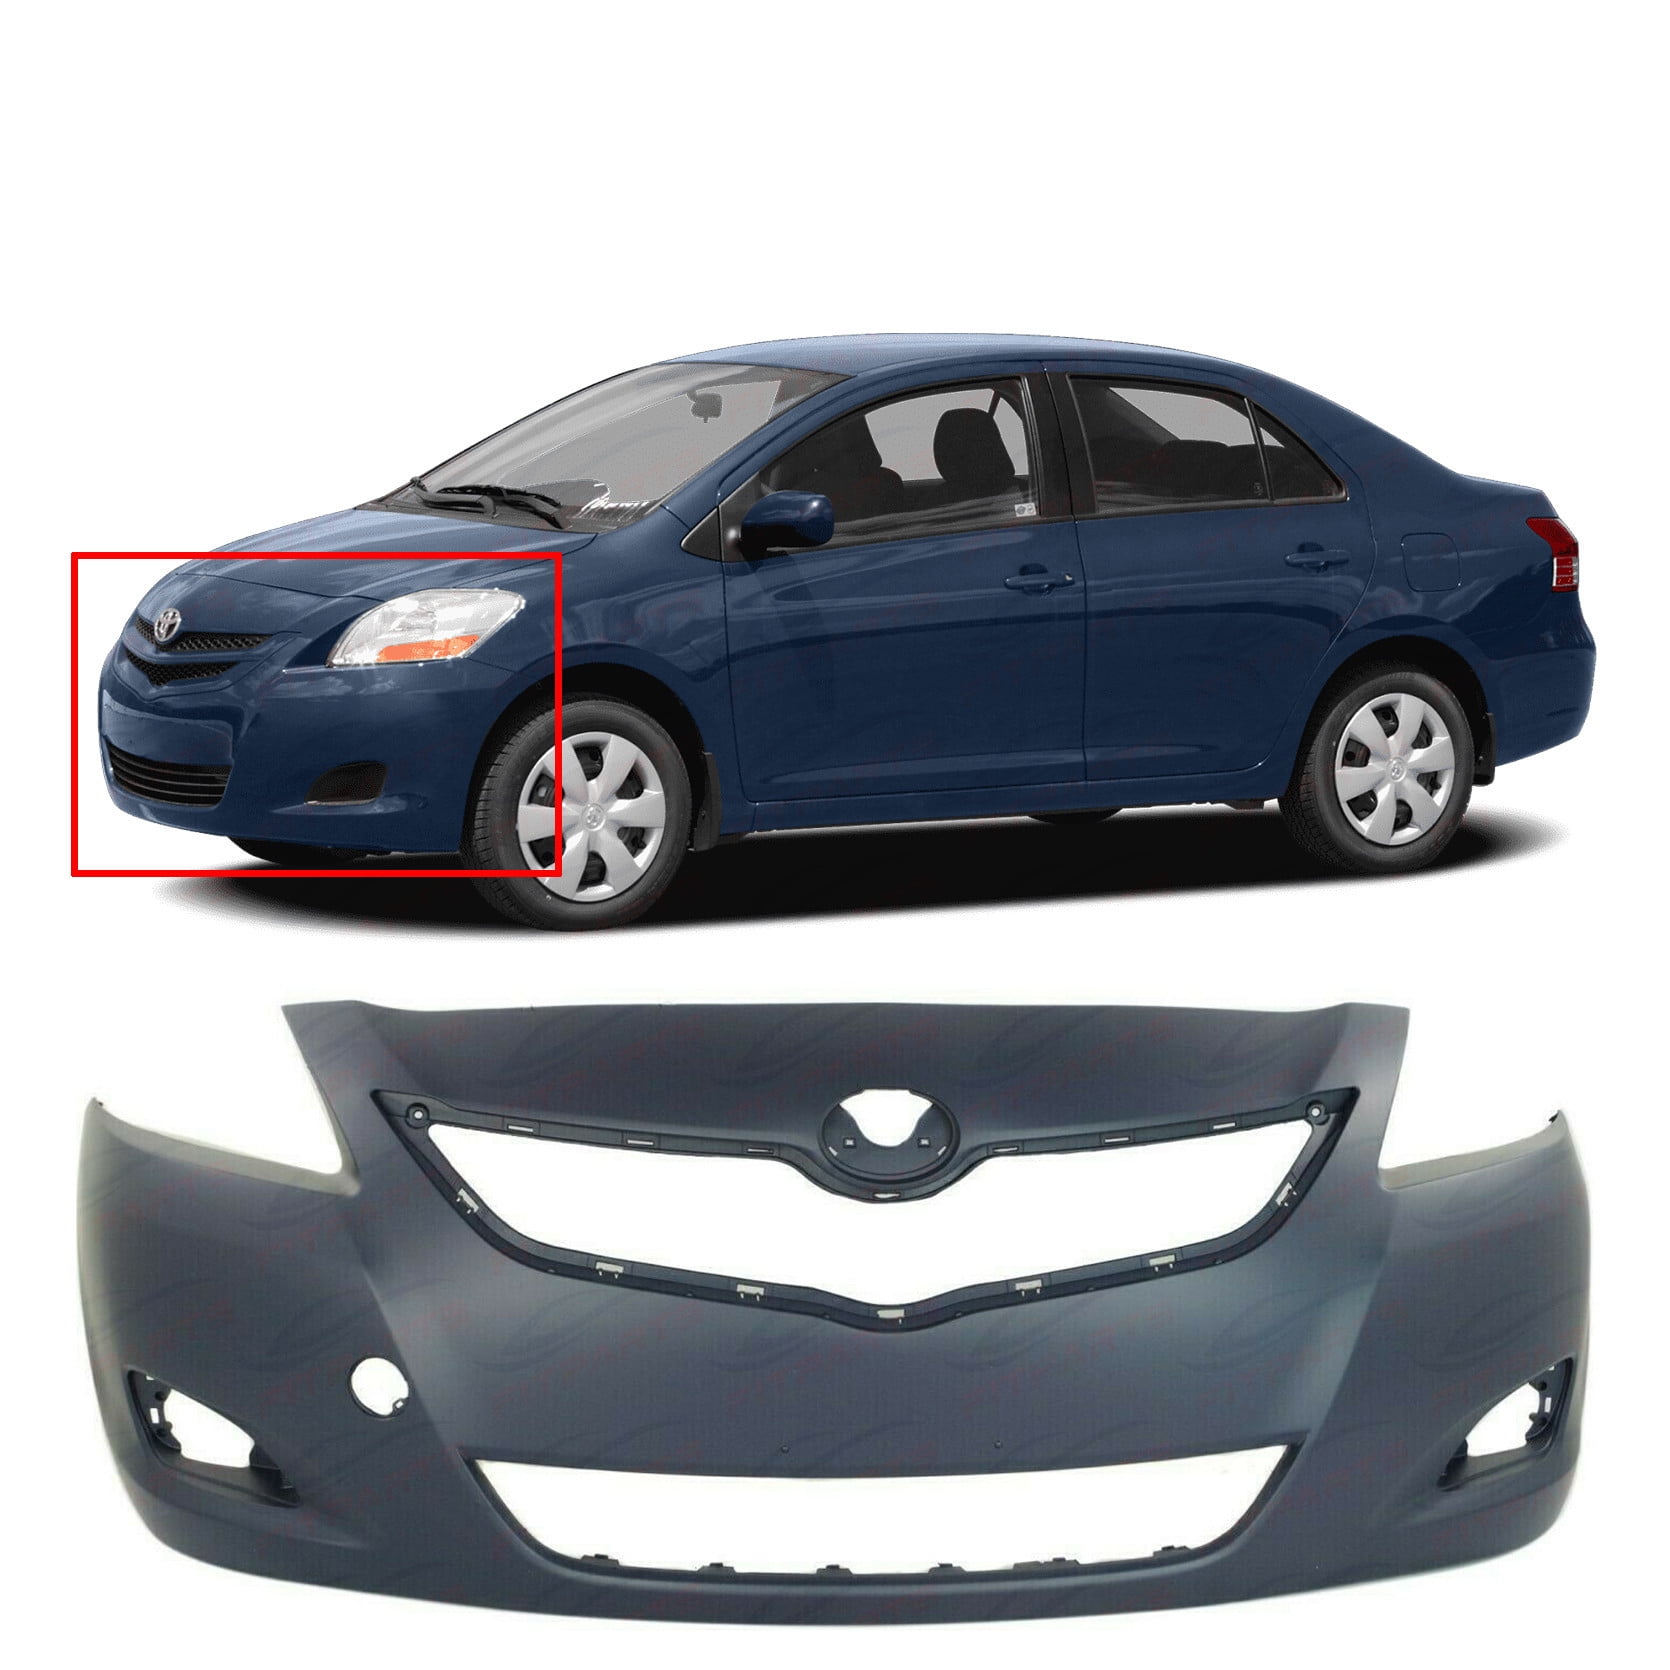 Primered MBI AUTO TO1000352 Front Bumper Cover Fascia for 2009 2010 2011 Toyota Yaris Hatchback 09 10 11 